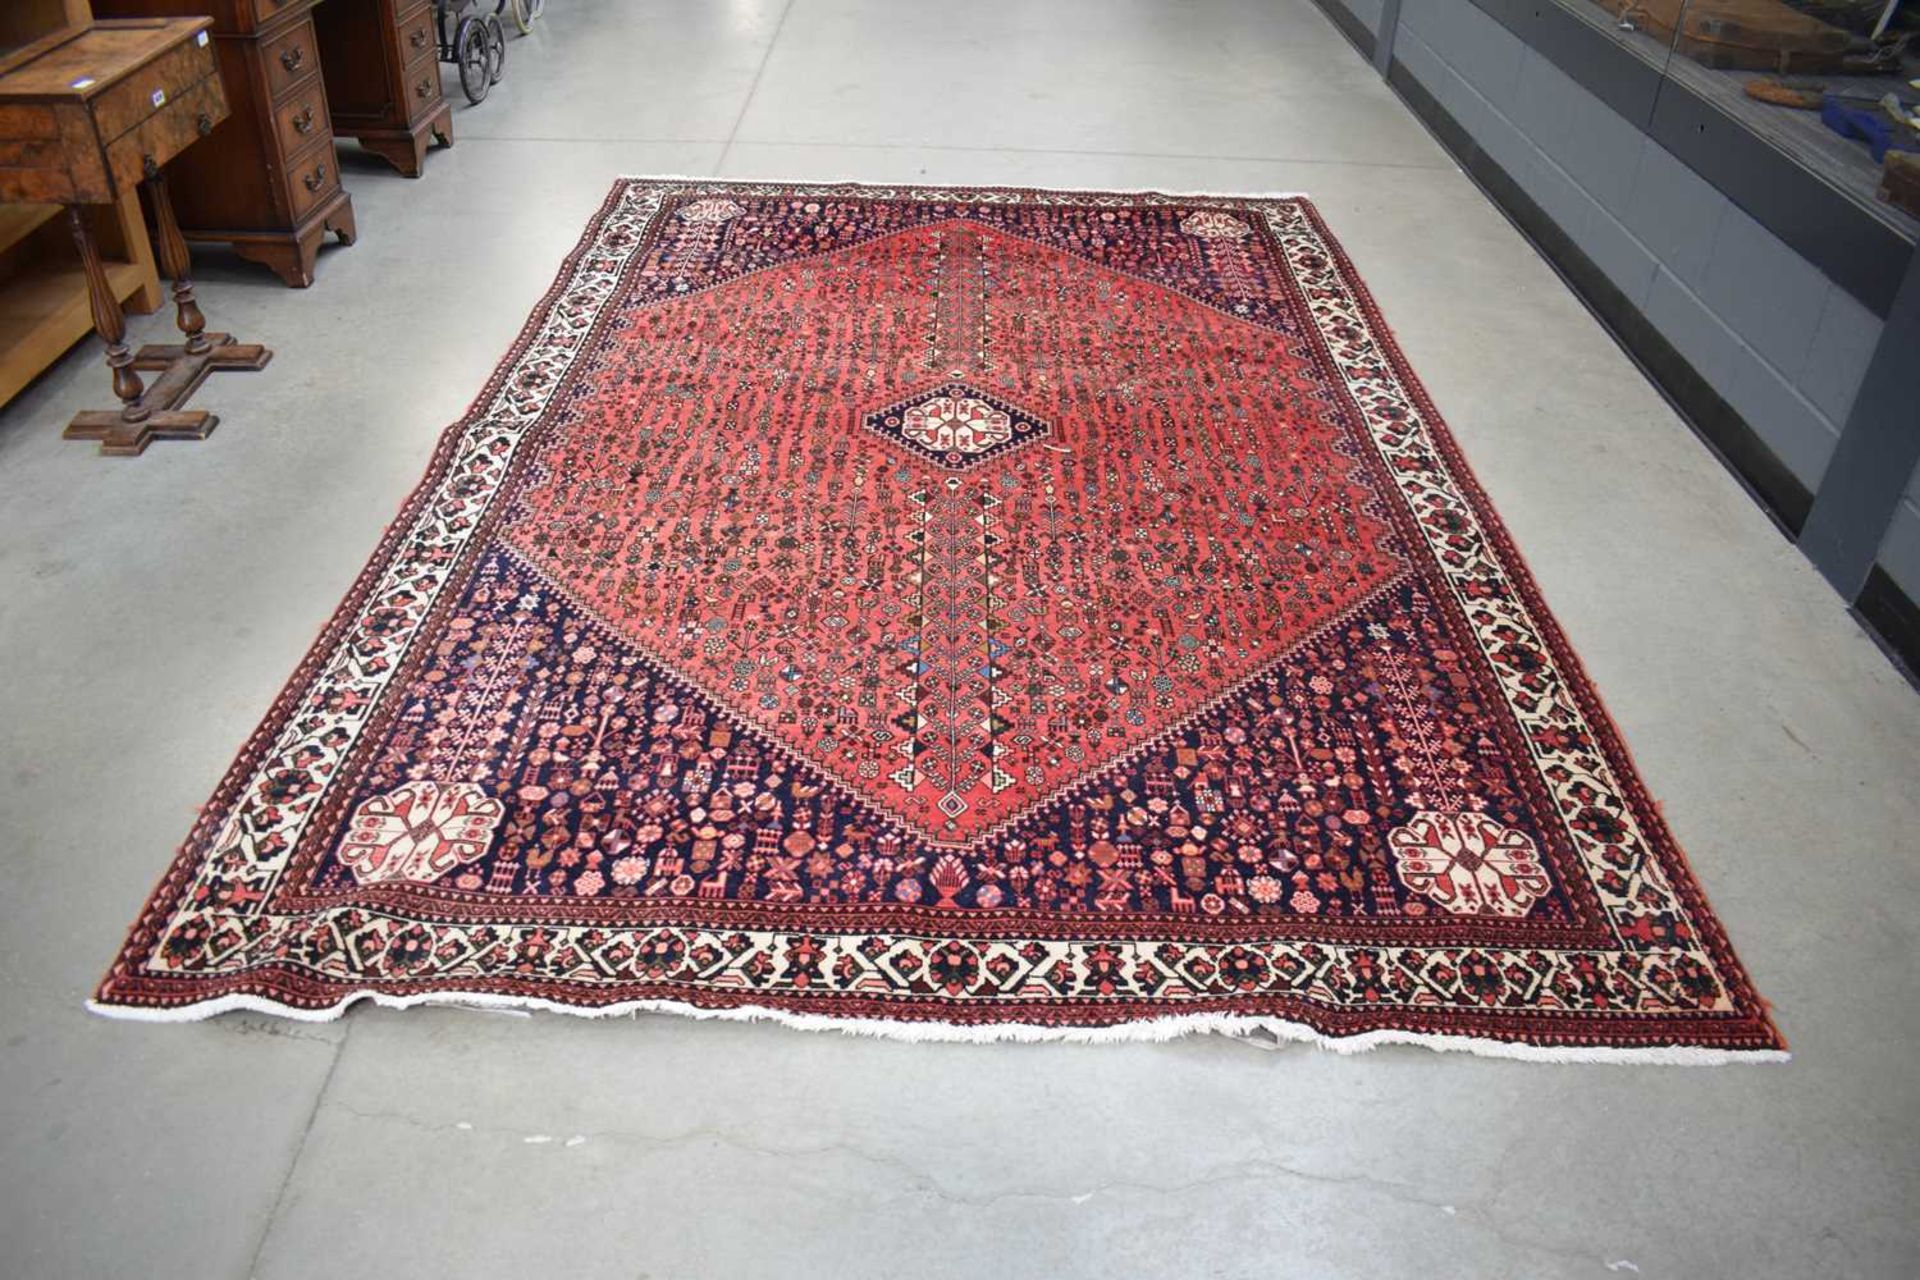 A Persian 'Abadeh' carpet, hand-woven in Iran, with a red ground and stylied motifs, 307 x 204 cm